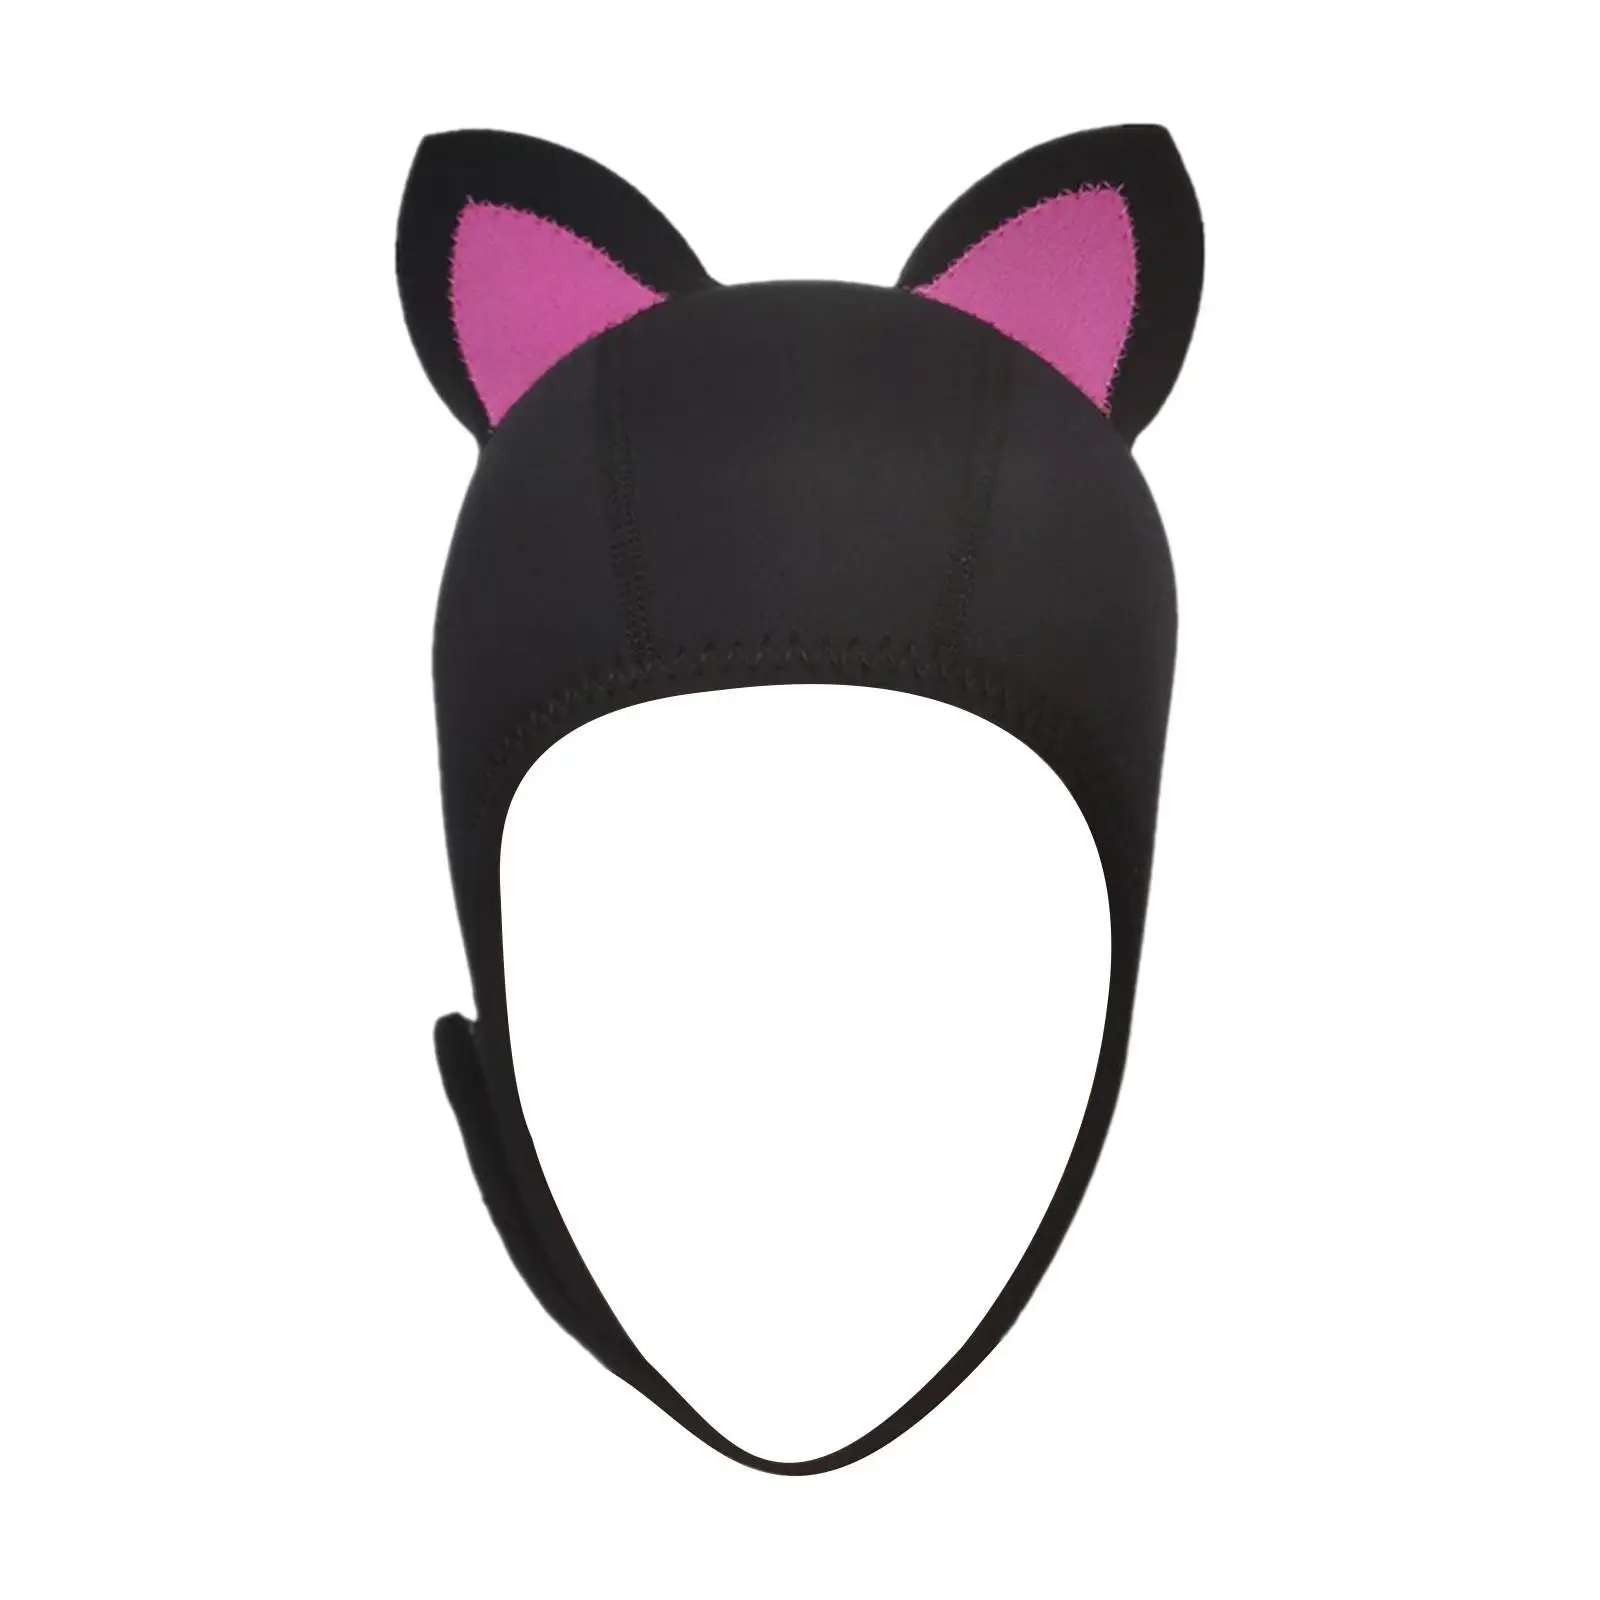 

Cat Ears Scuba Diving Hood Hat 3mm Neoprene with Air Vent with Adjustable Hook and Loop Fastener Chin Strap